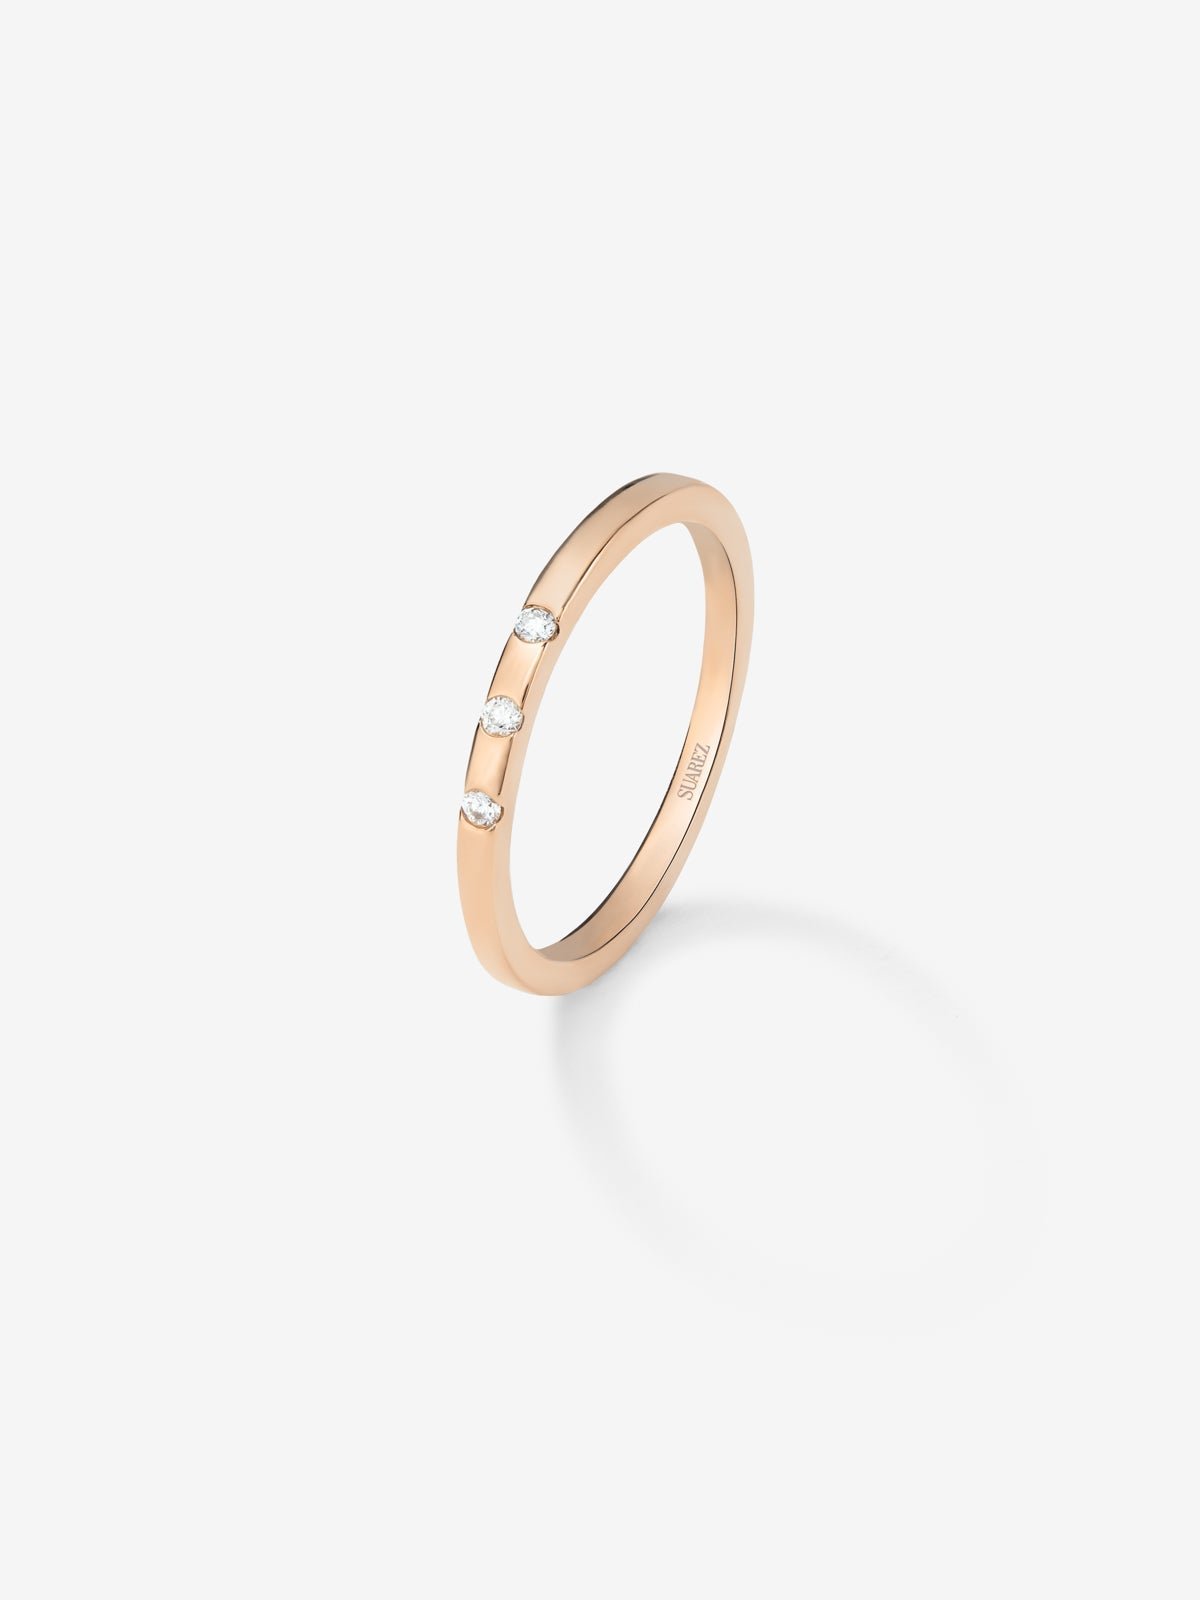 18K rose gold ring with 3 brilliant-cut diamonds with a total of 1.4 cts